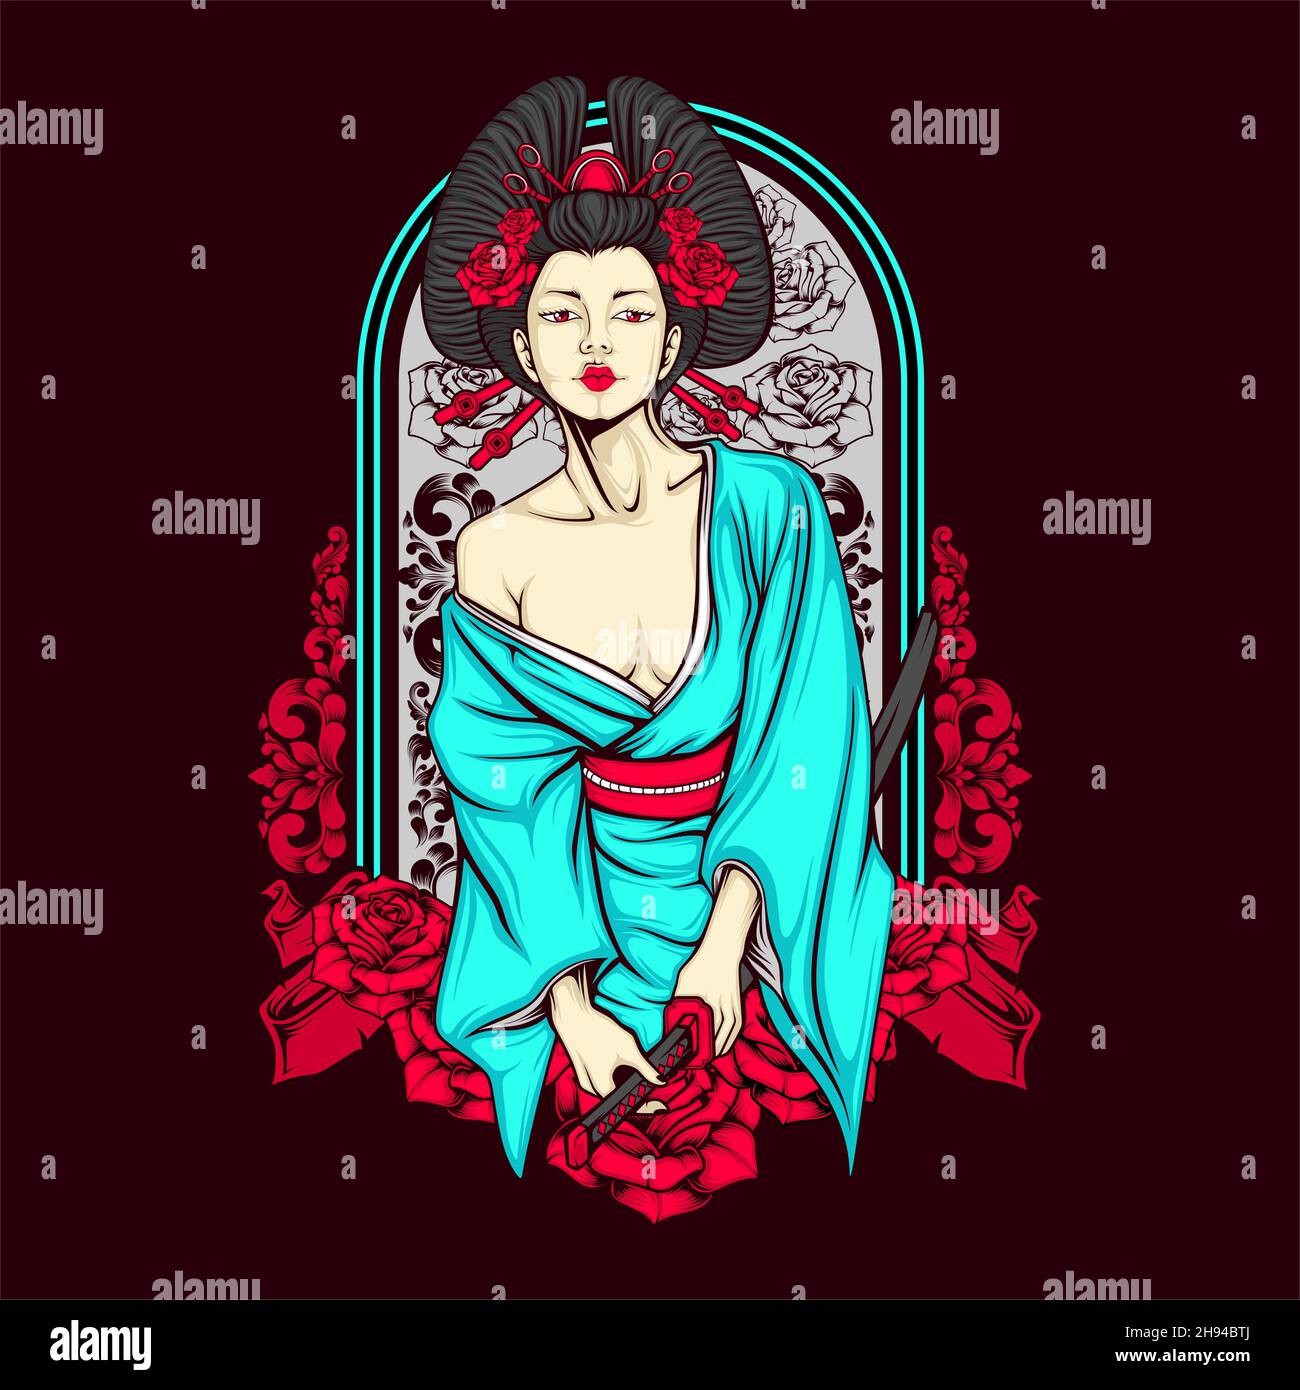 samurai geisha illustration with awesome background Stock Vector